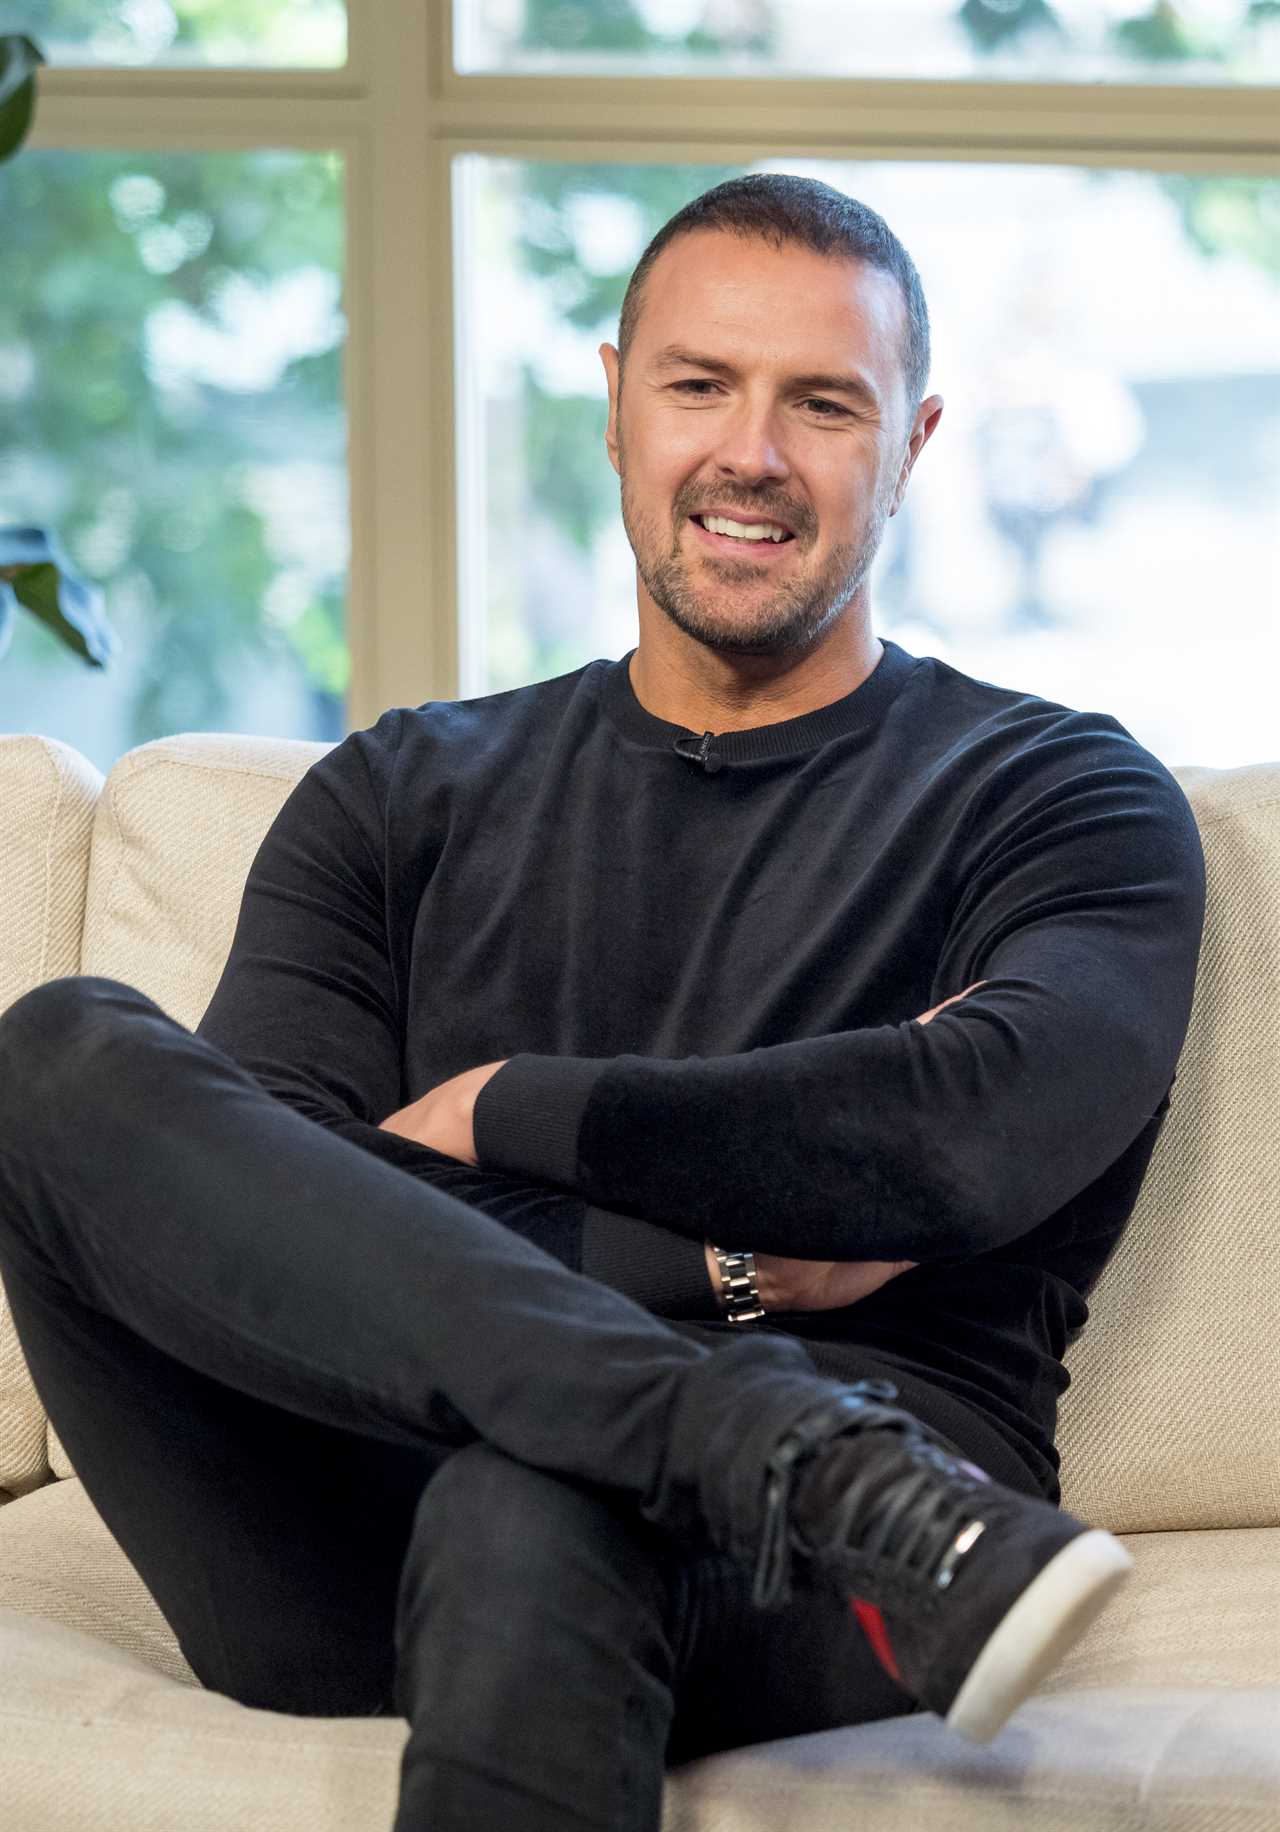 Paddy McGuinness: Net Worth, Career, and Family Life Unveiled